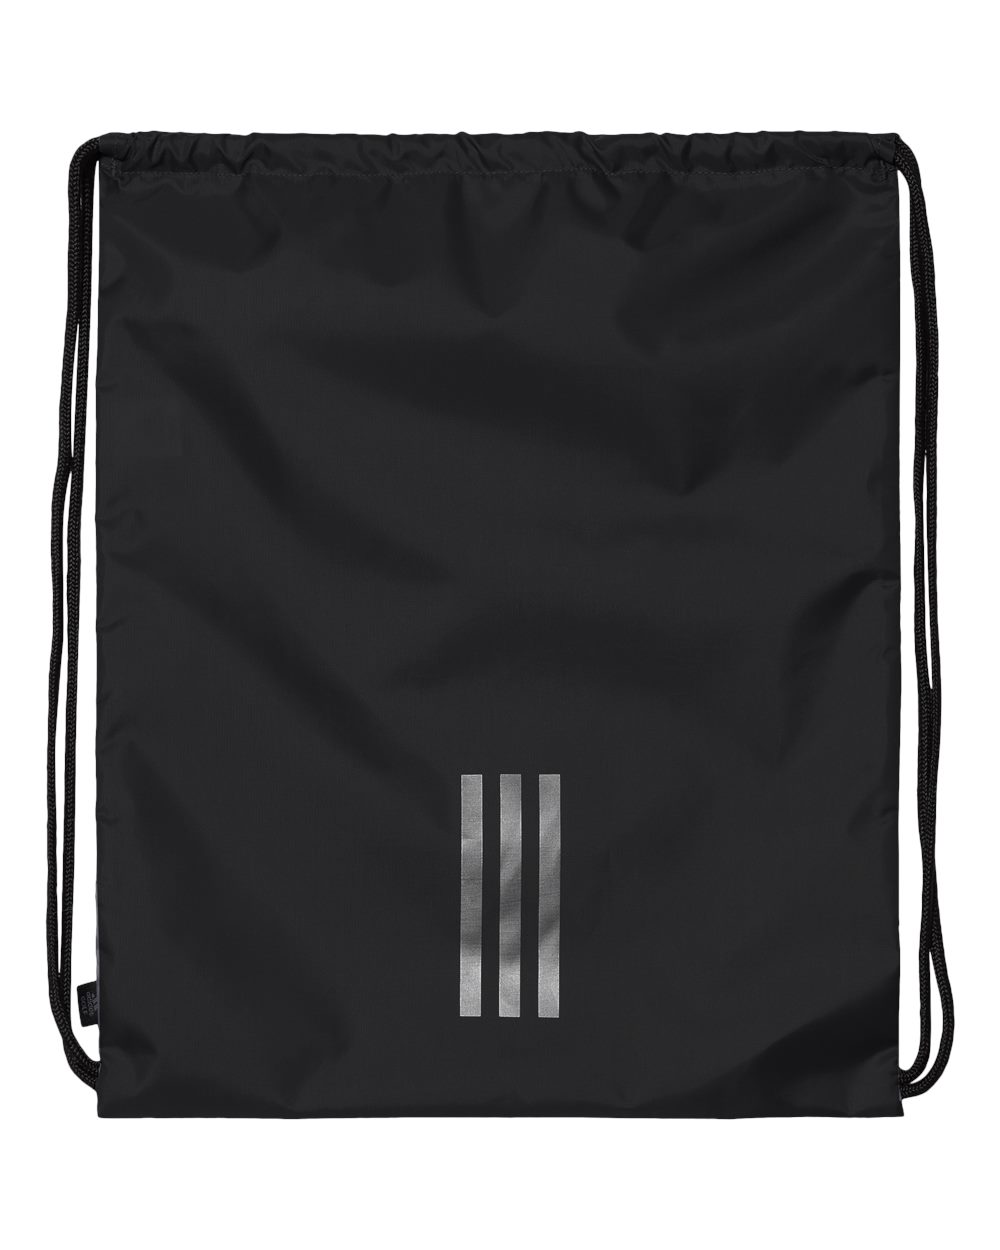 Picture of Adidas - Vertical 3-Stripes Gym Sack 